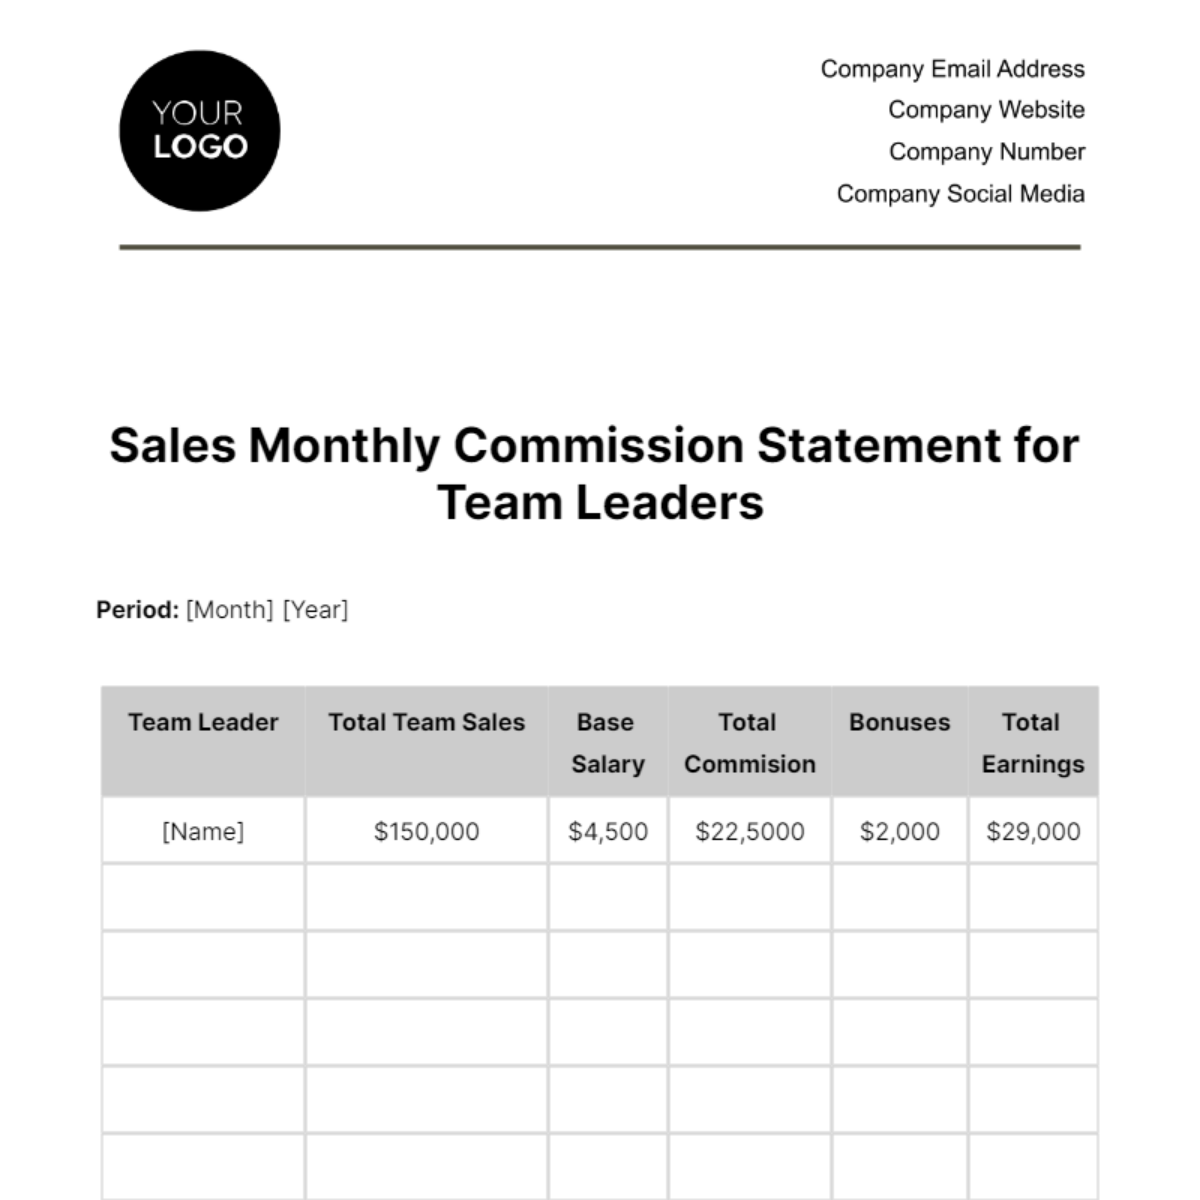 Sales Monthly Commission Statement for Team Leaders Template